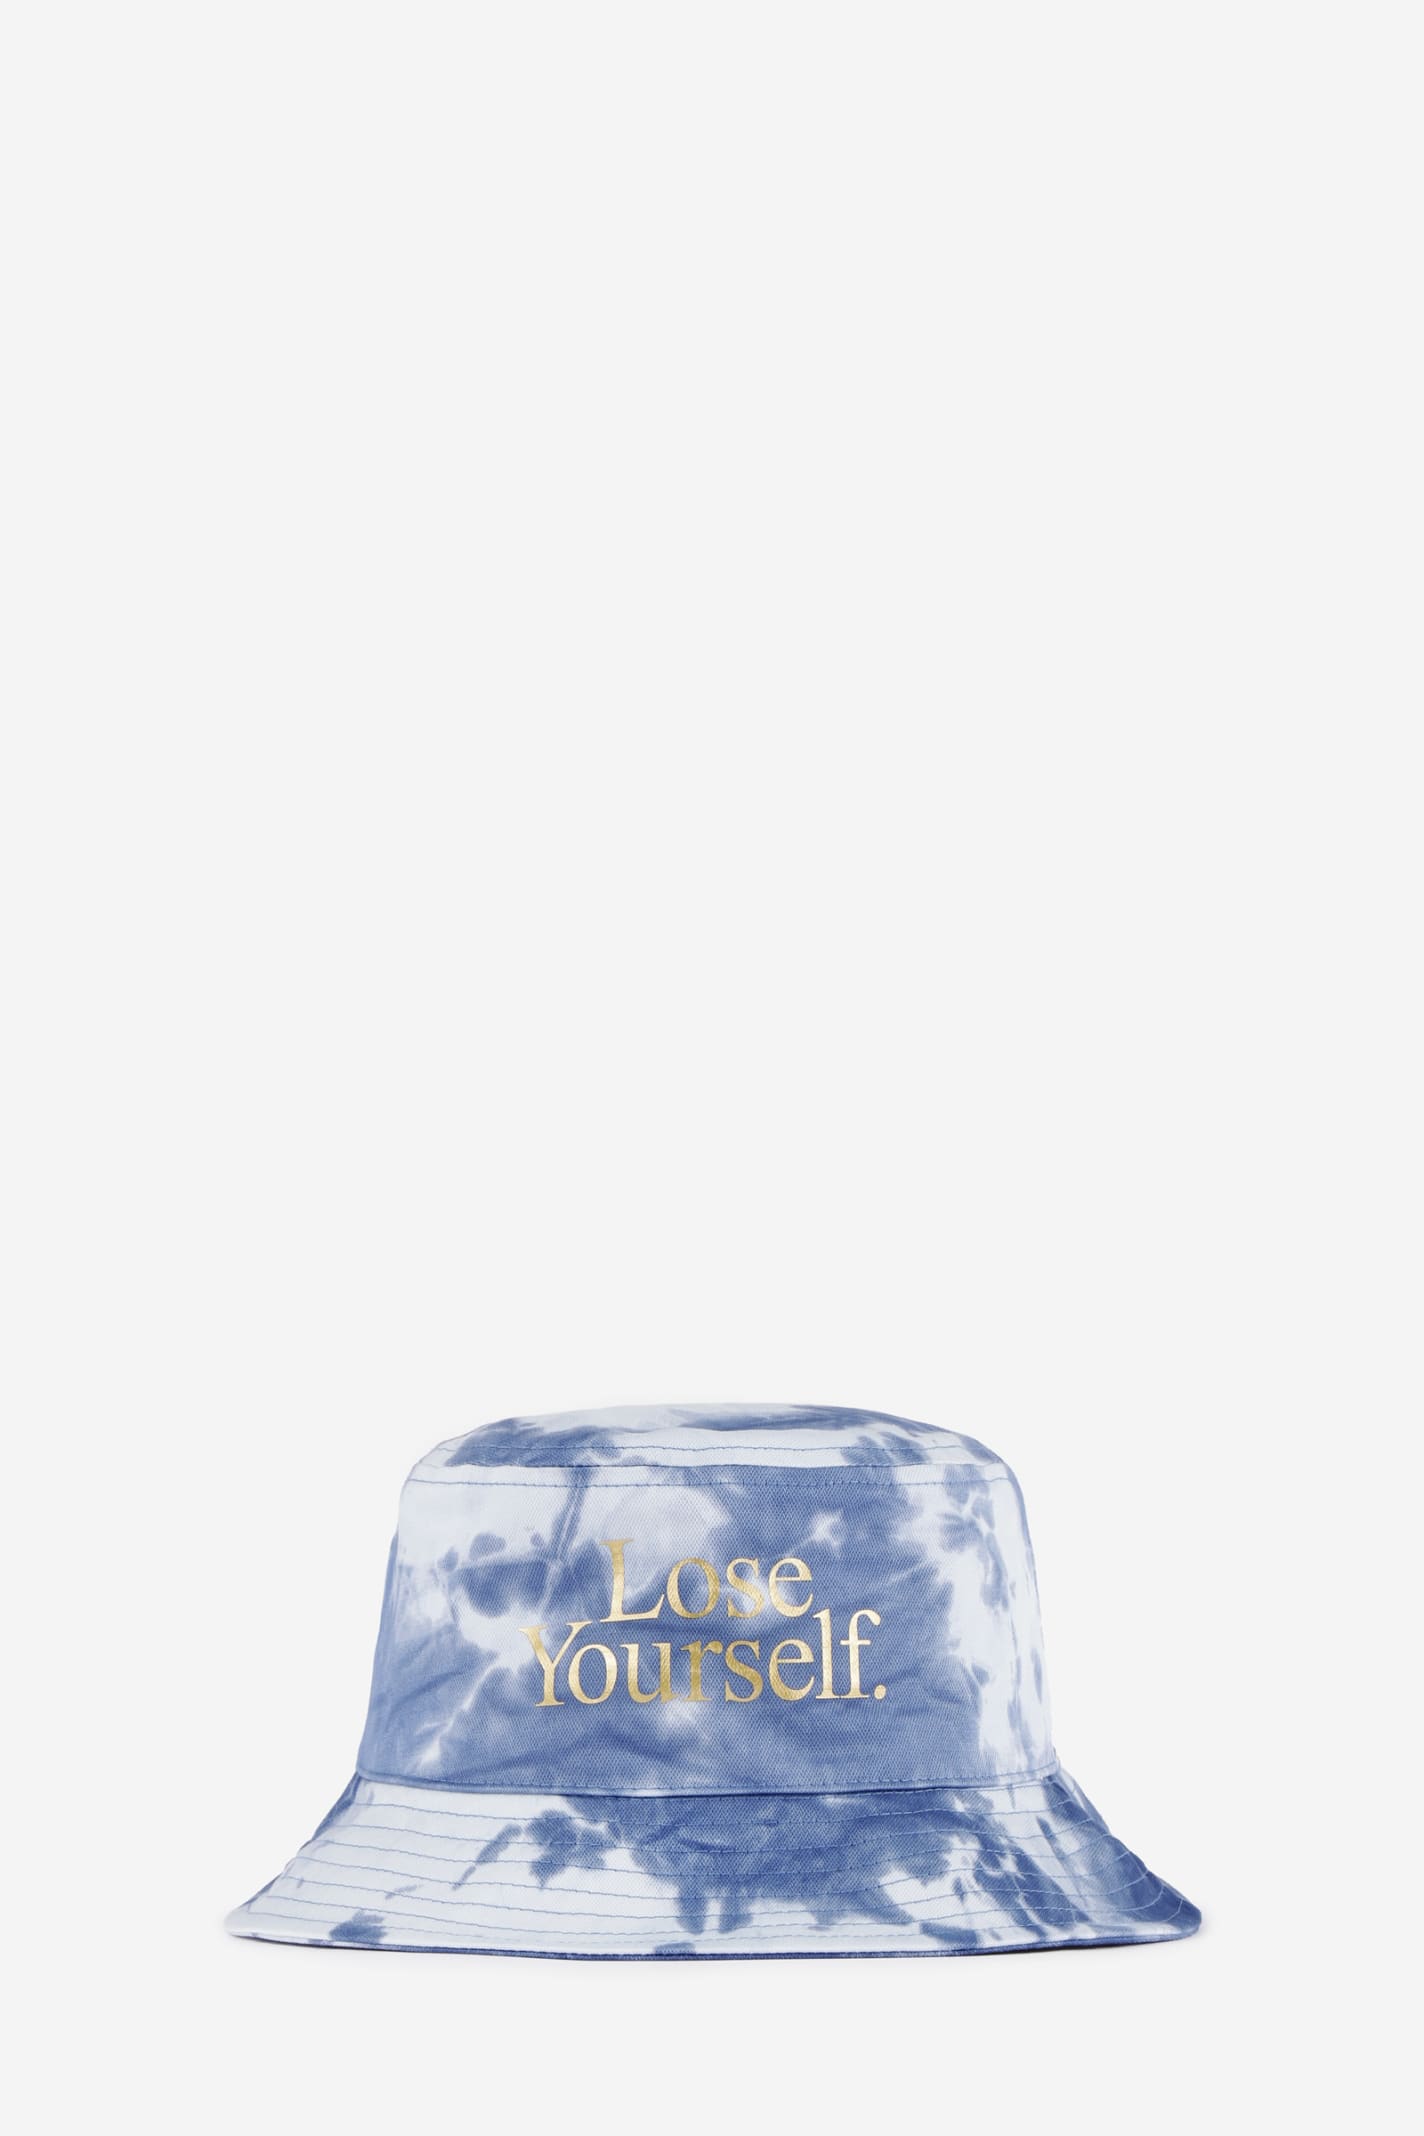 Paco Rabanne Lose Yourself Hats